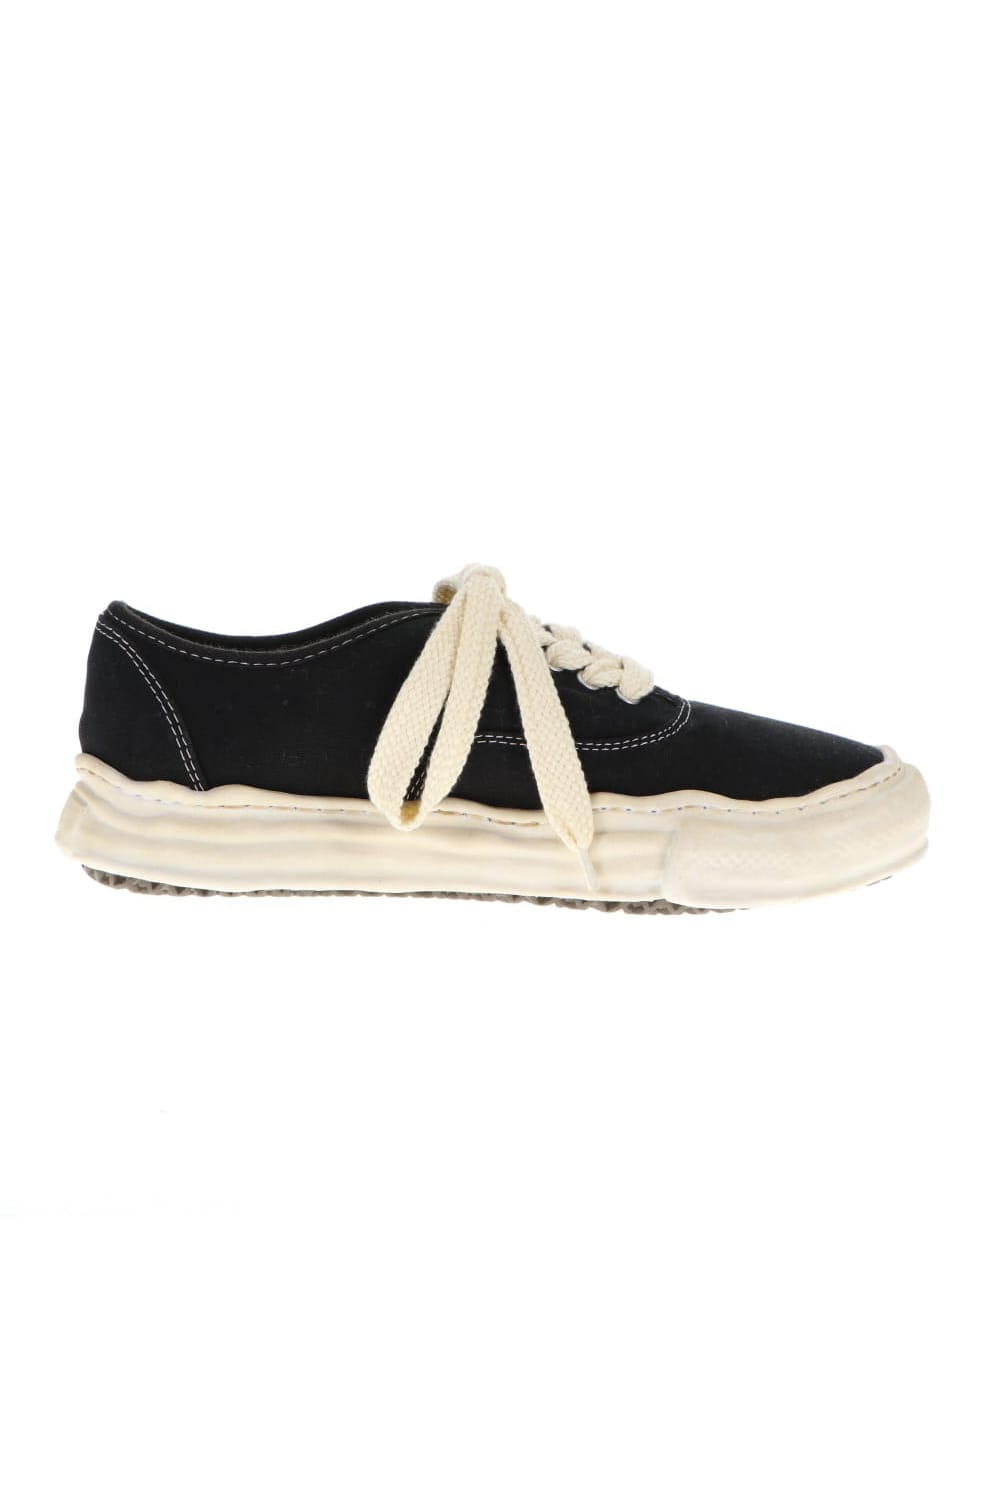 -BAKER- Over-dyed original sole canvas Low-Top sneakers Black